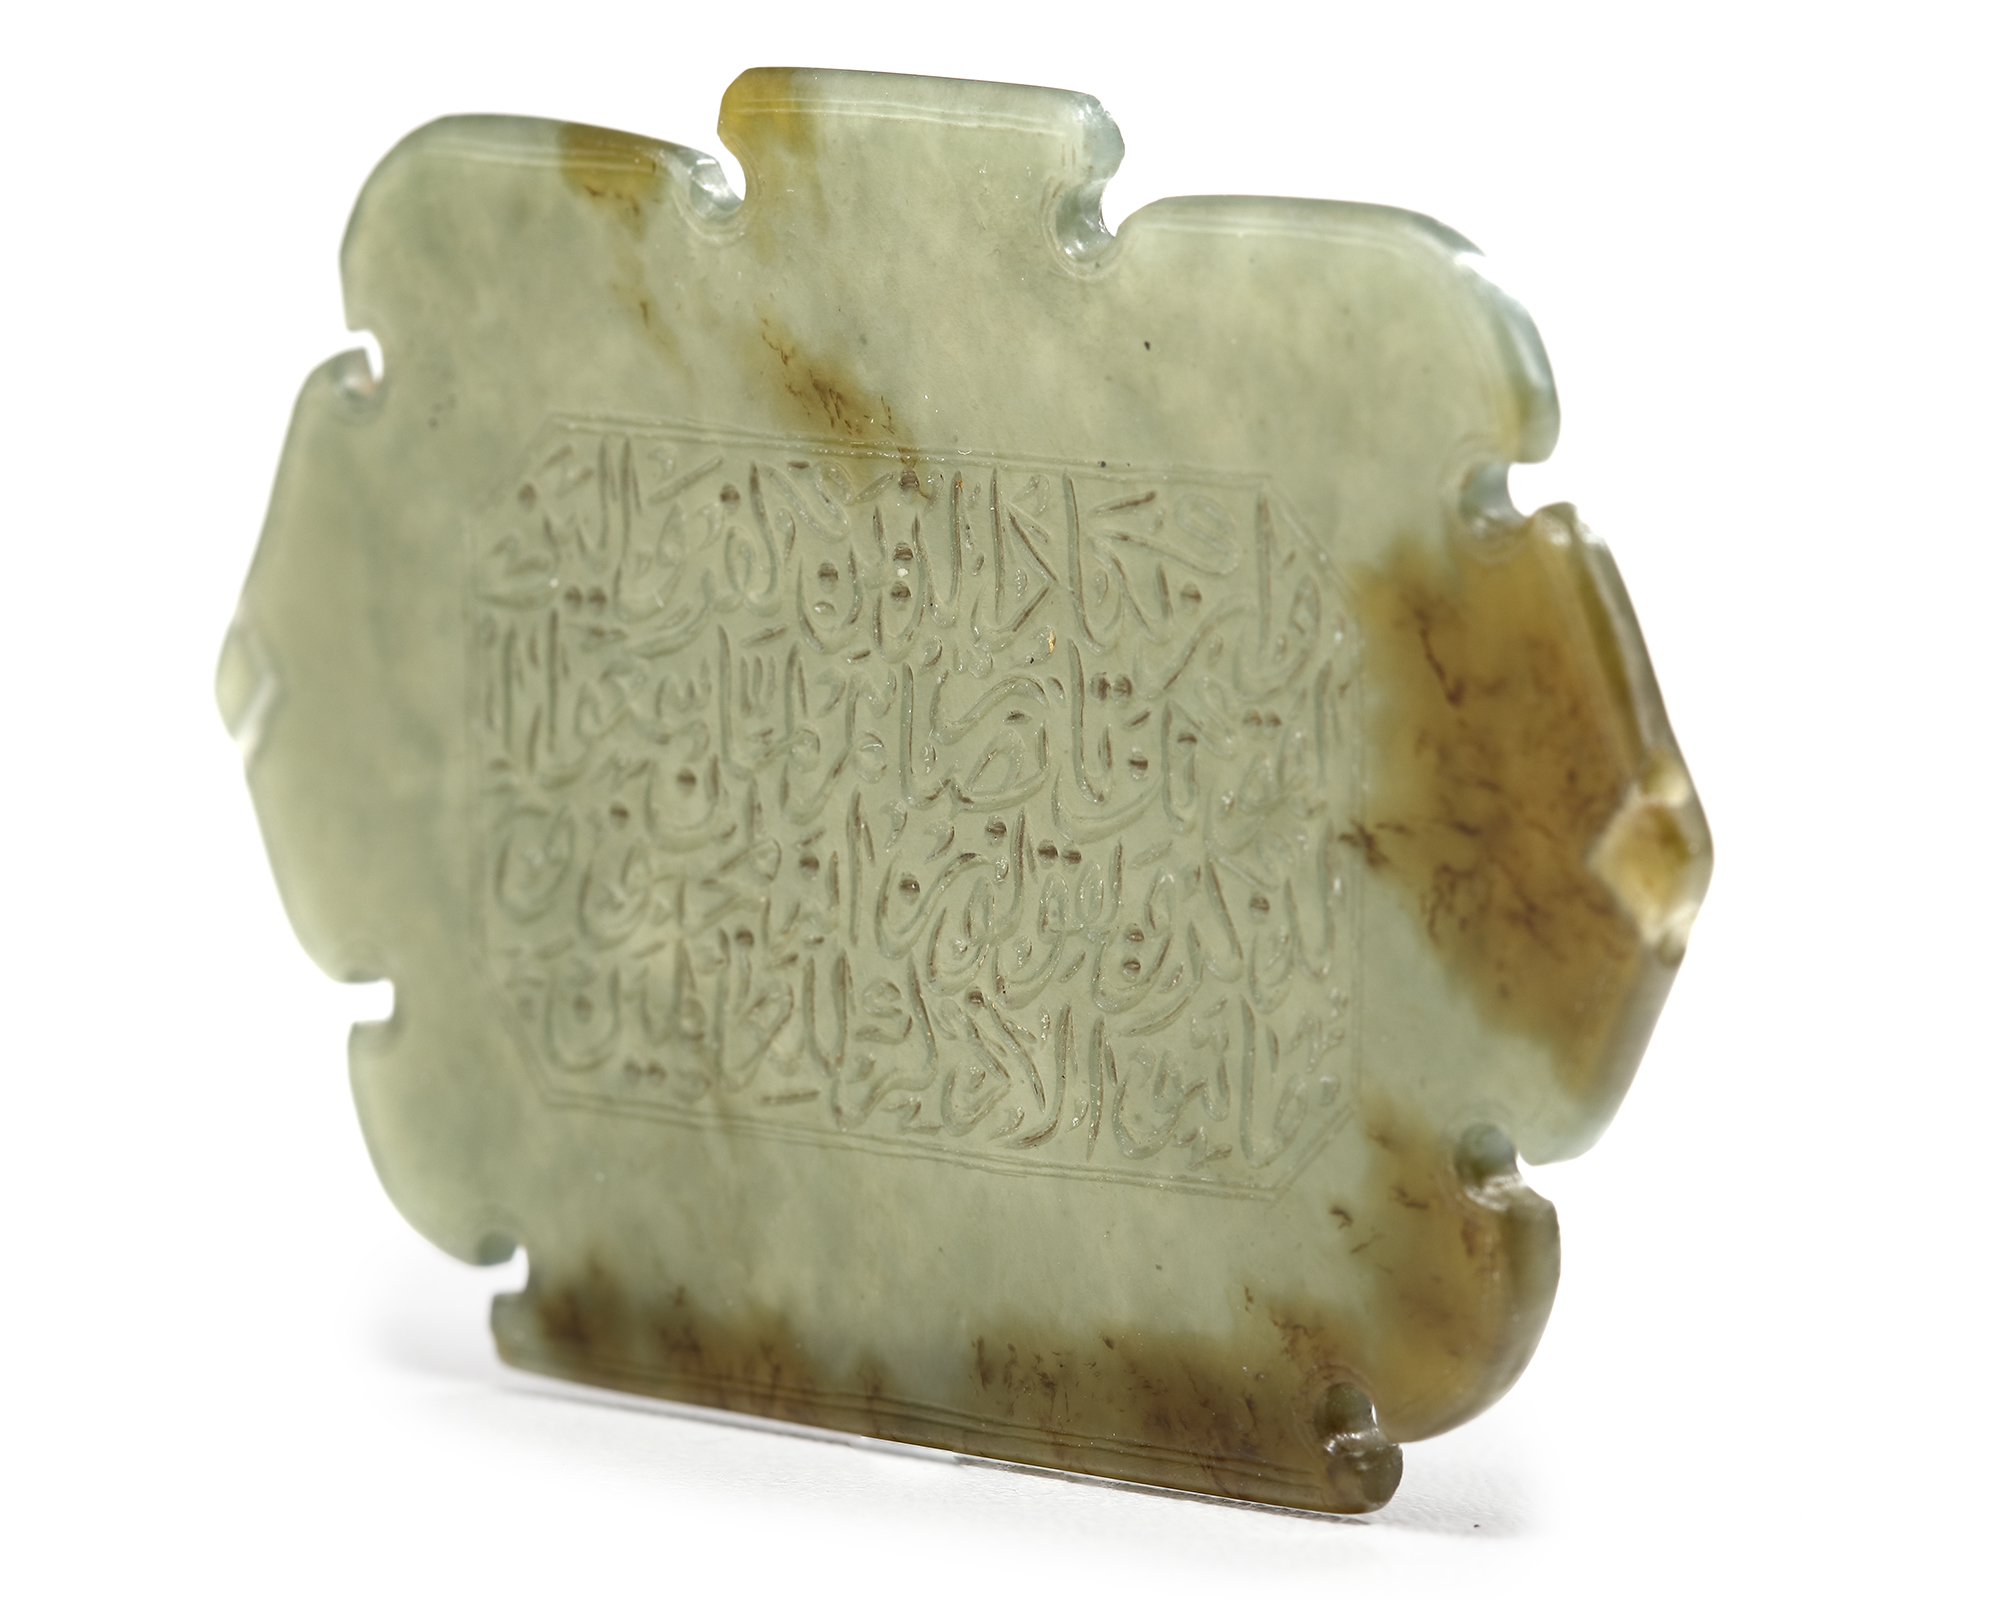 A MUGHAL CARVED JADE PLAQUE, NORTHERN INDIA, 18TH CENTURY - Image 3 of 3